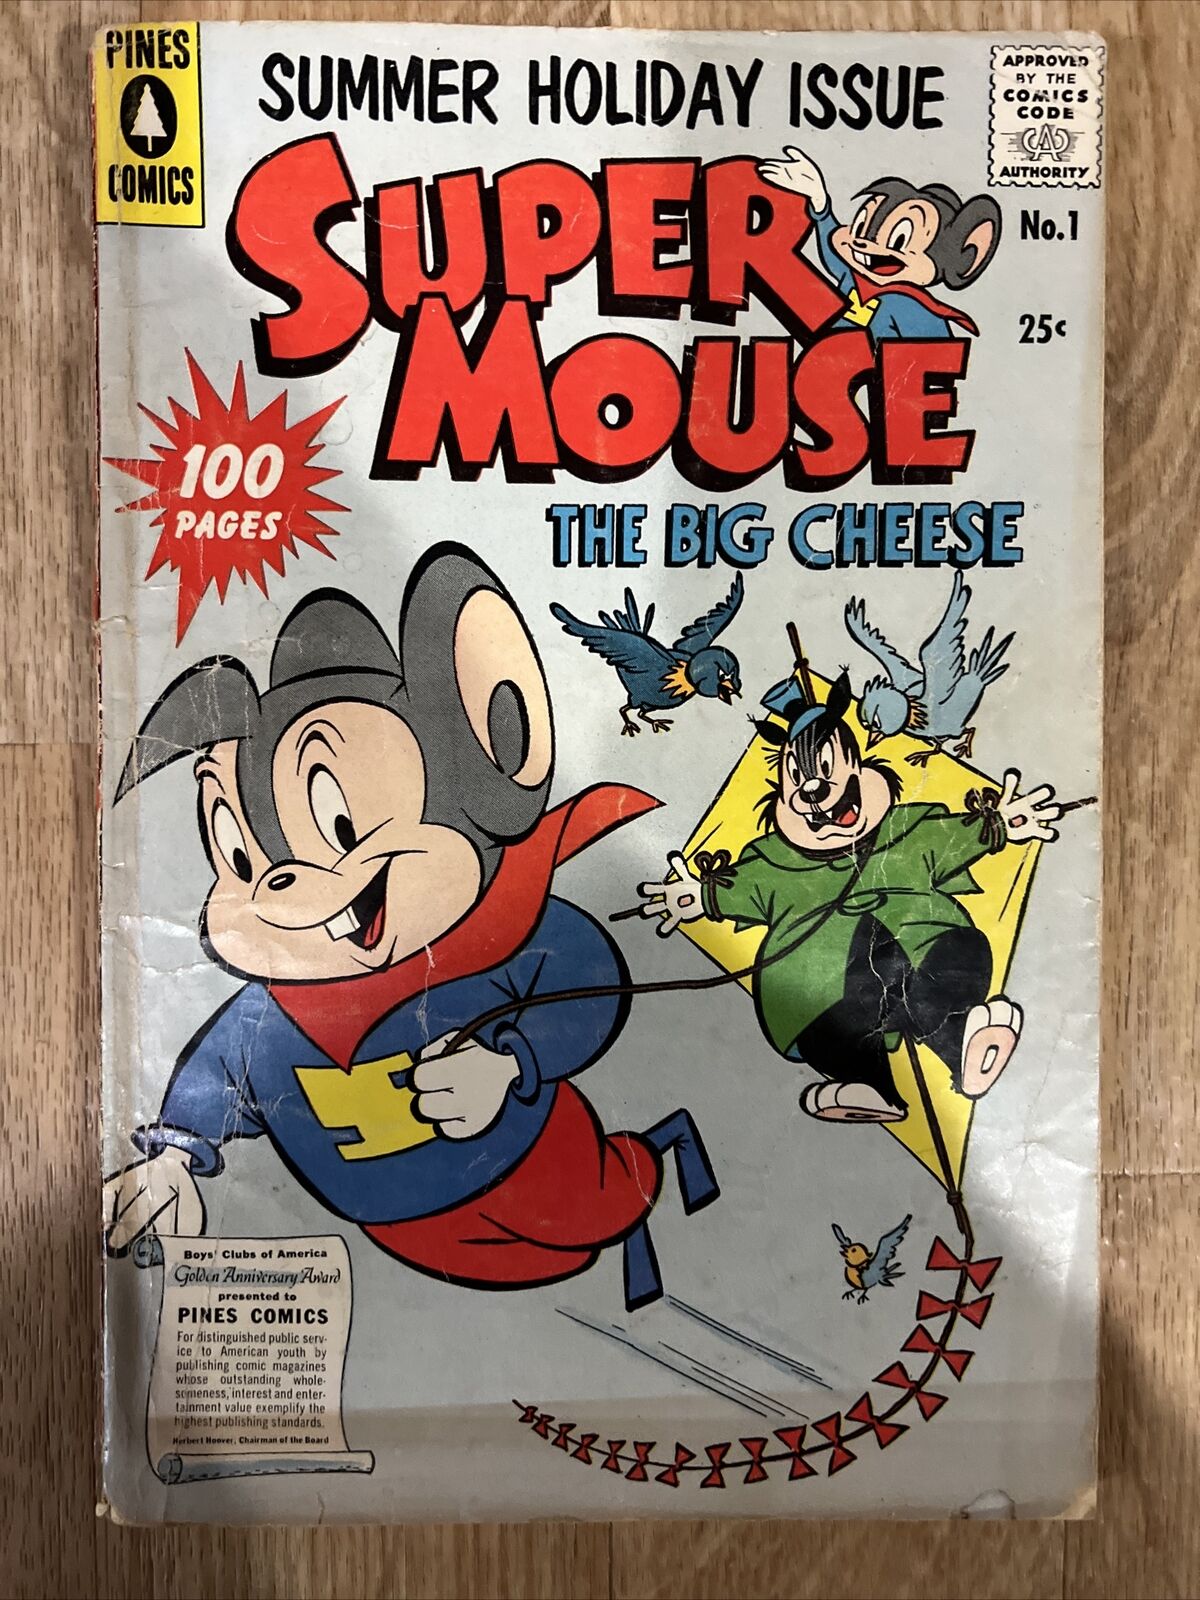 Supermouse: The Big Cheese #1 in Good + condition. Pines comics